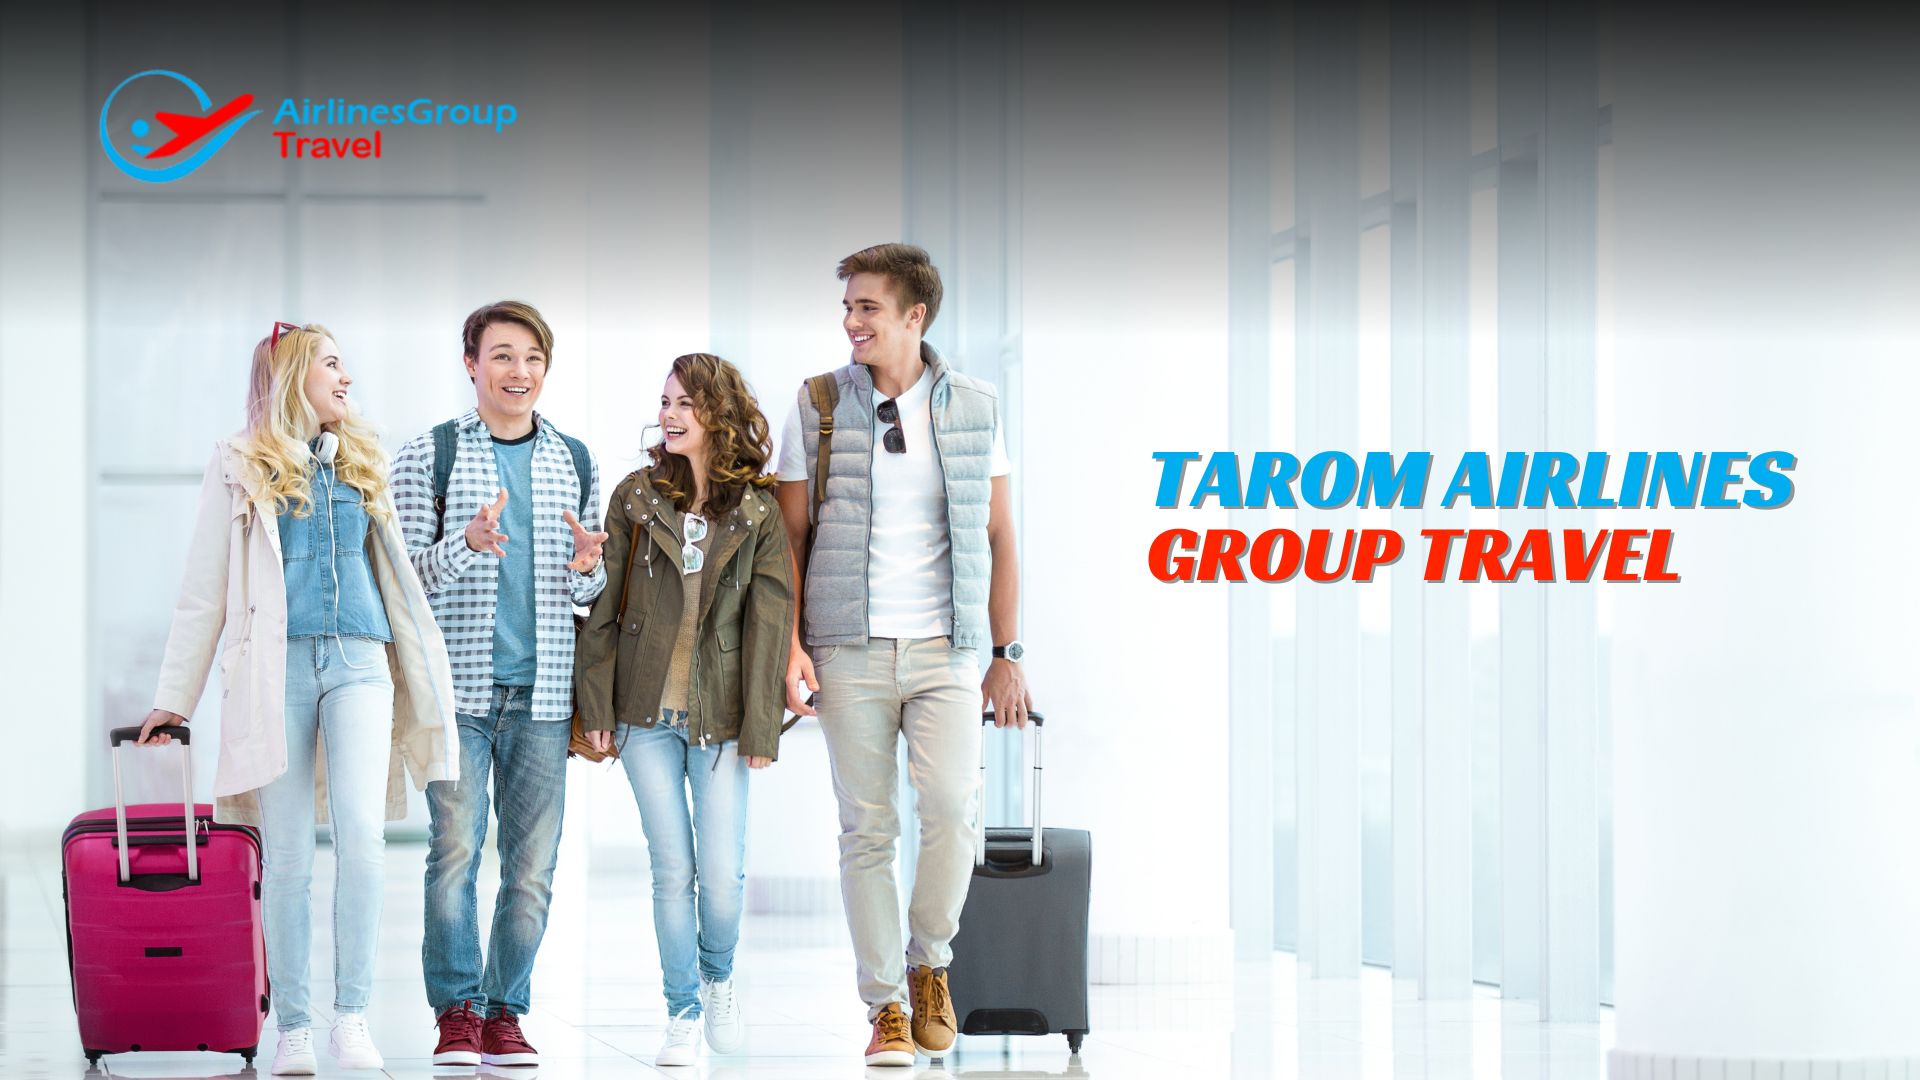 TAROM Airlines Group Travel